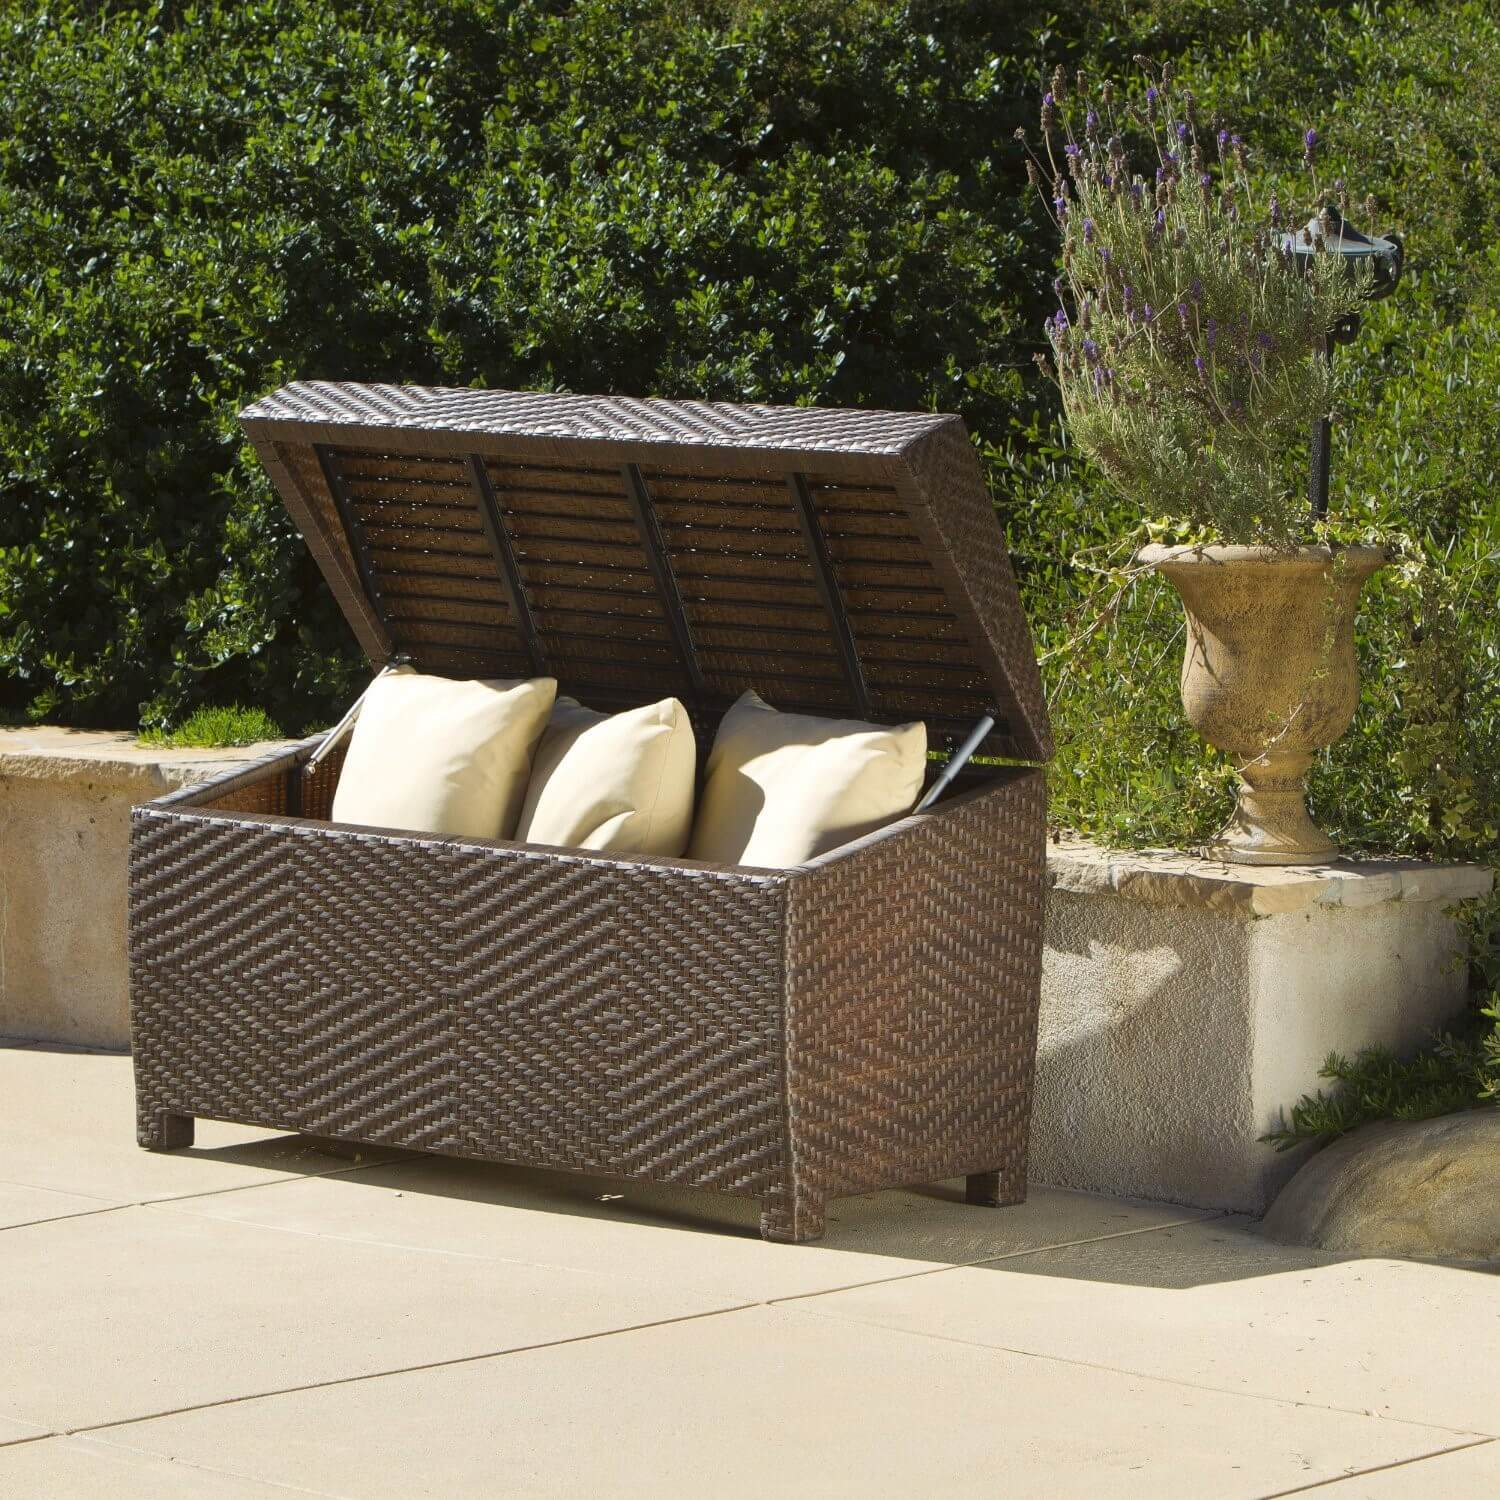 Outdoor Cushion Storage Box Rattan Storage Ideas Go Very Well To in sizing 1500 X 1500